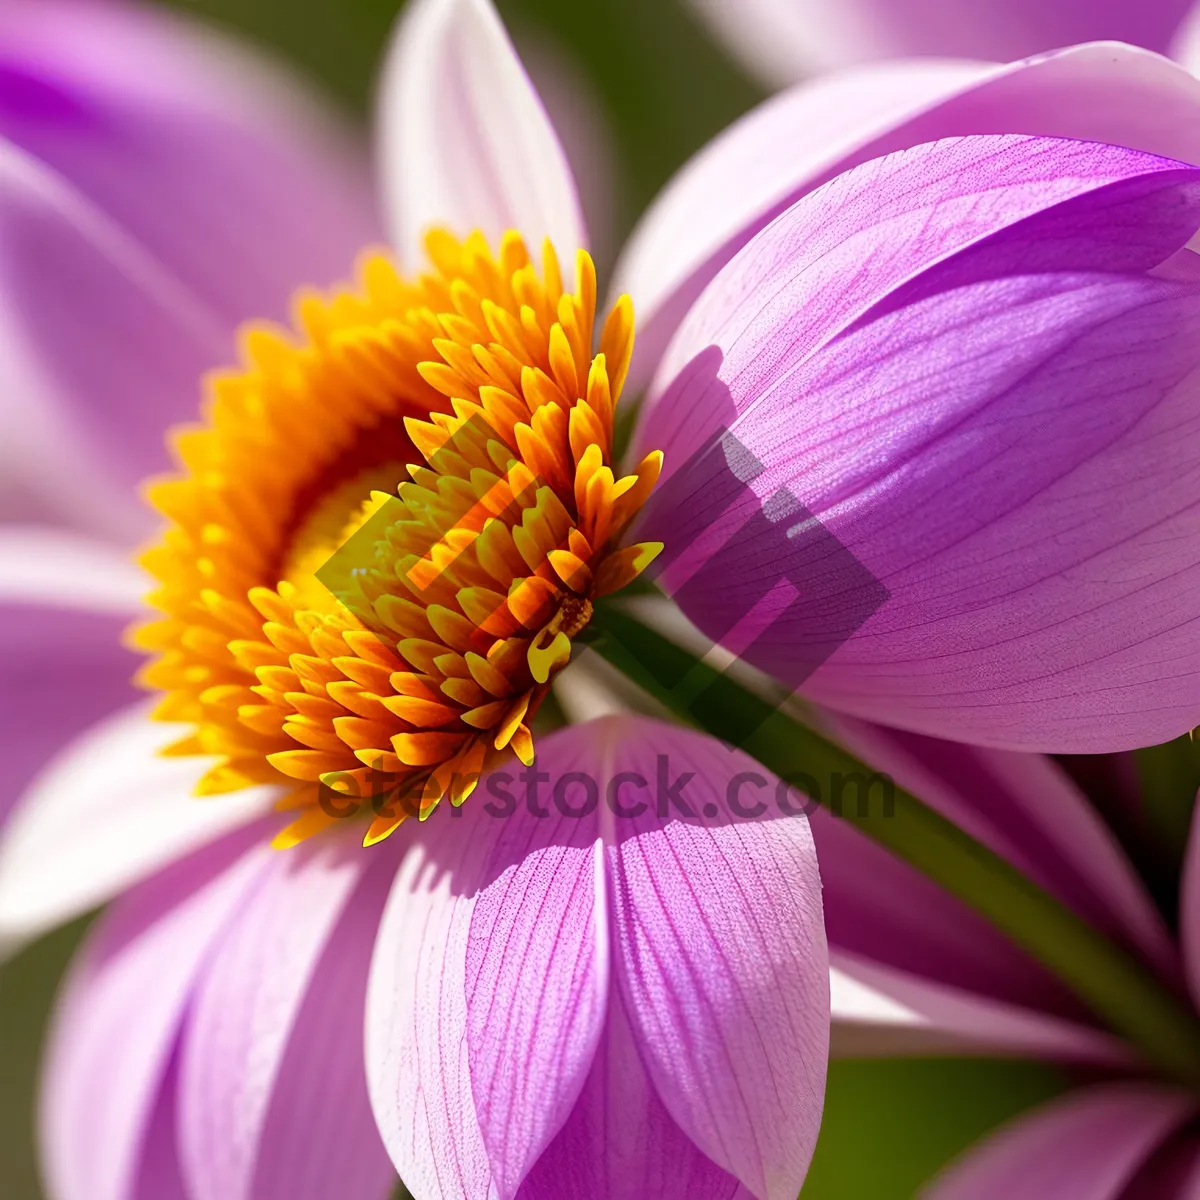 Picture of Pink Daisy Blossom in Summer Garden